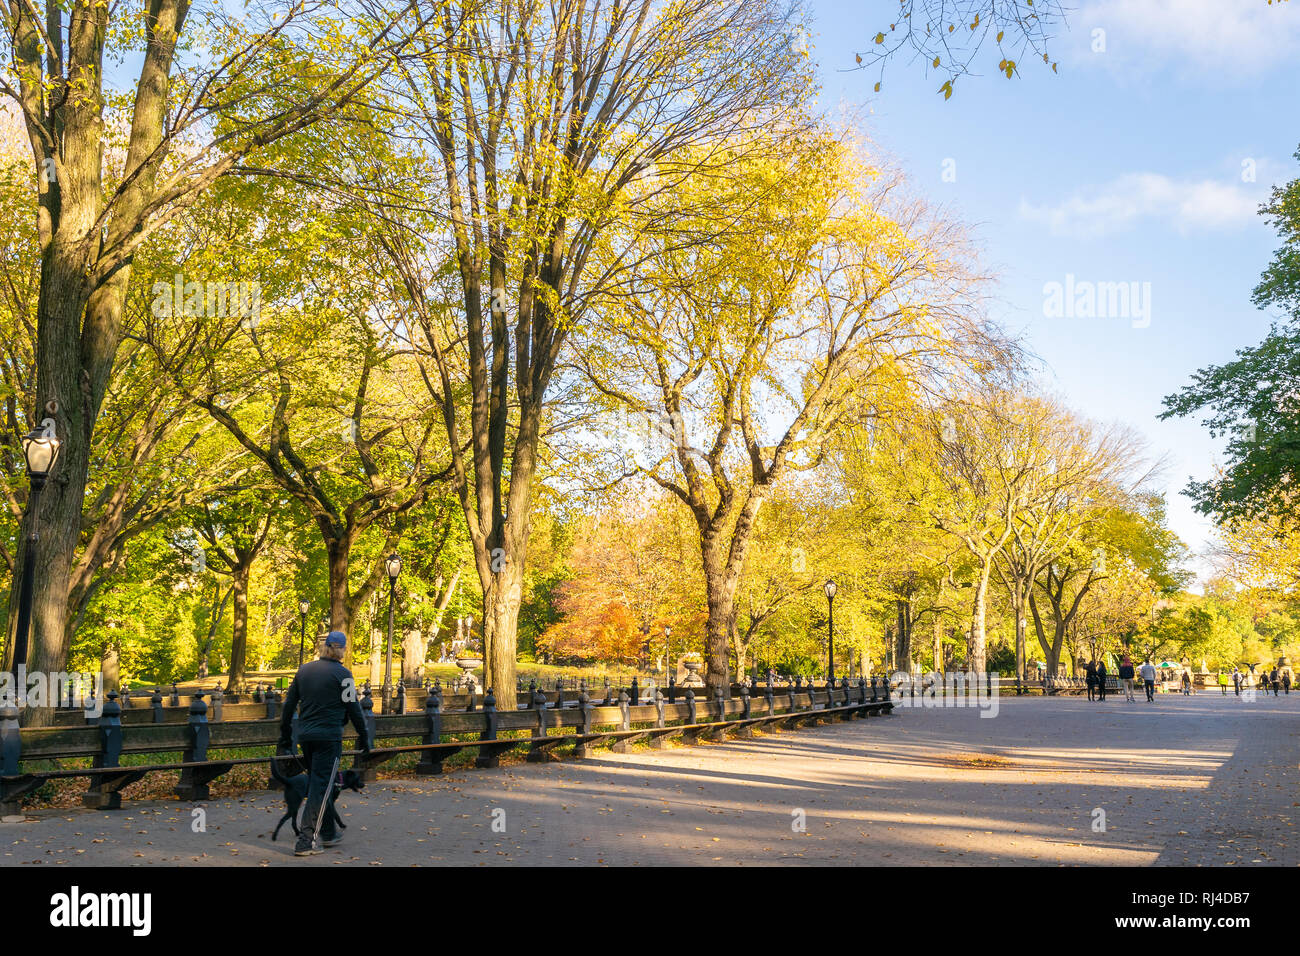 Scenic landscape and people exercising/jogging/walking/riding through Central Park New York during the colorful Autumn/Fall season Stock Photo